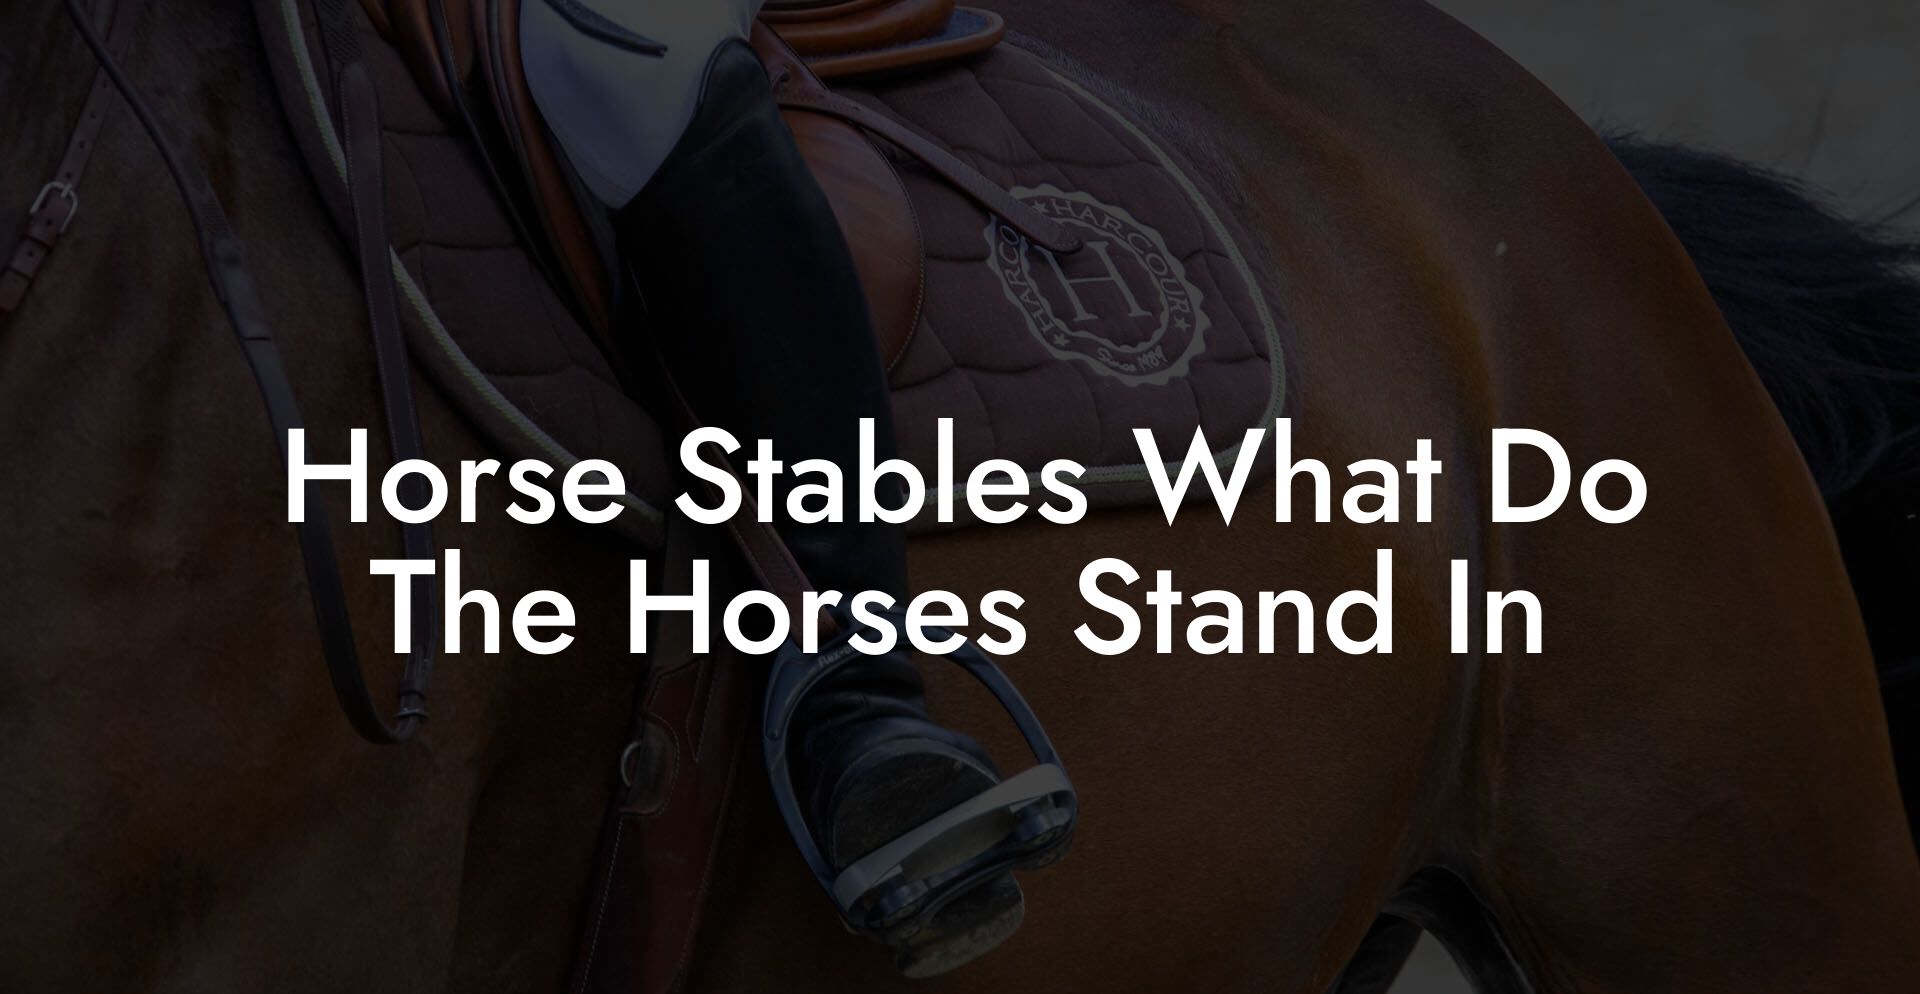 Horse Stables What Do The Horses Stand In